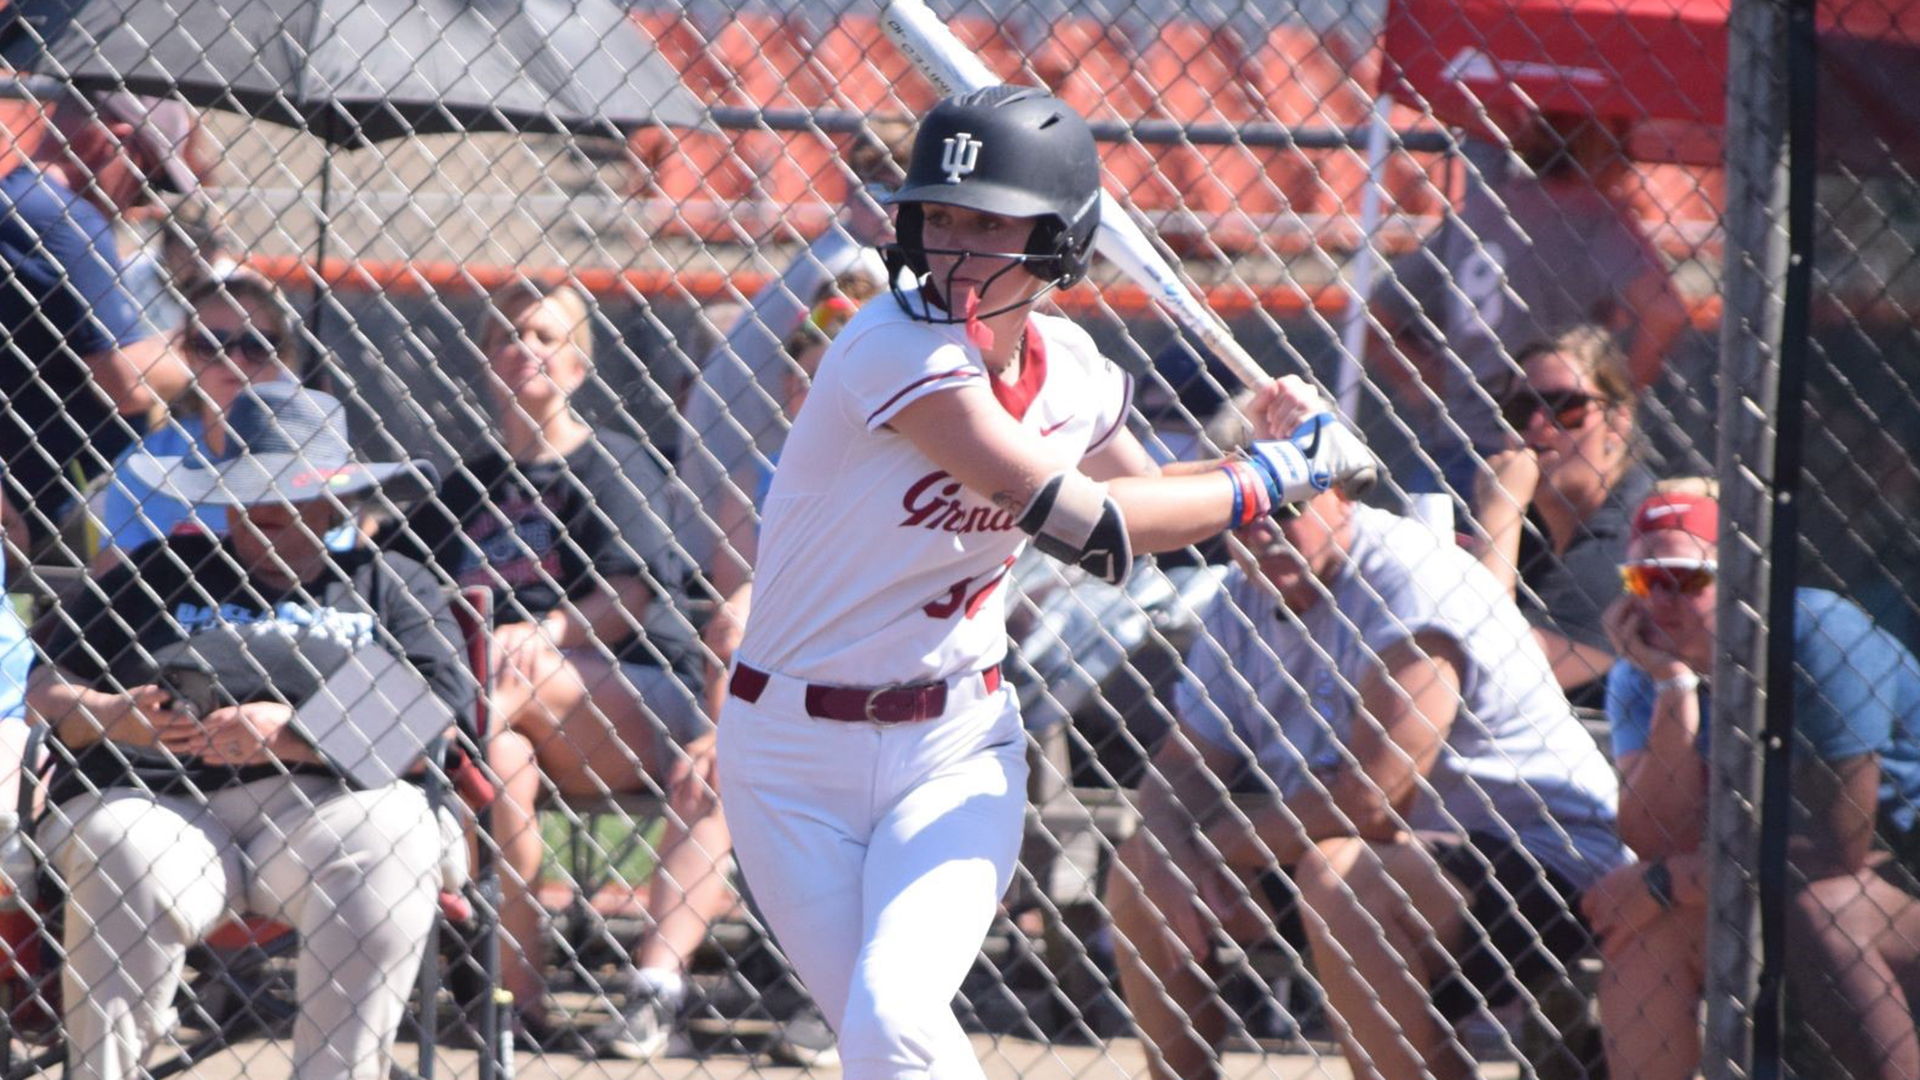 Josie Lemmons had a hit and scored a run in the Grenadiers' 7-3 loss to Stillman (Ala.) on Monday.